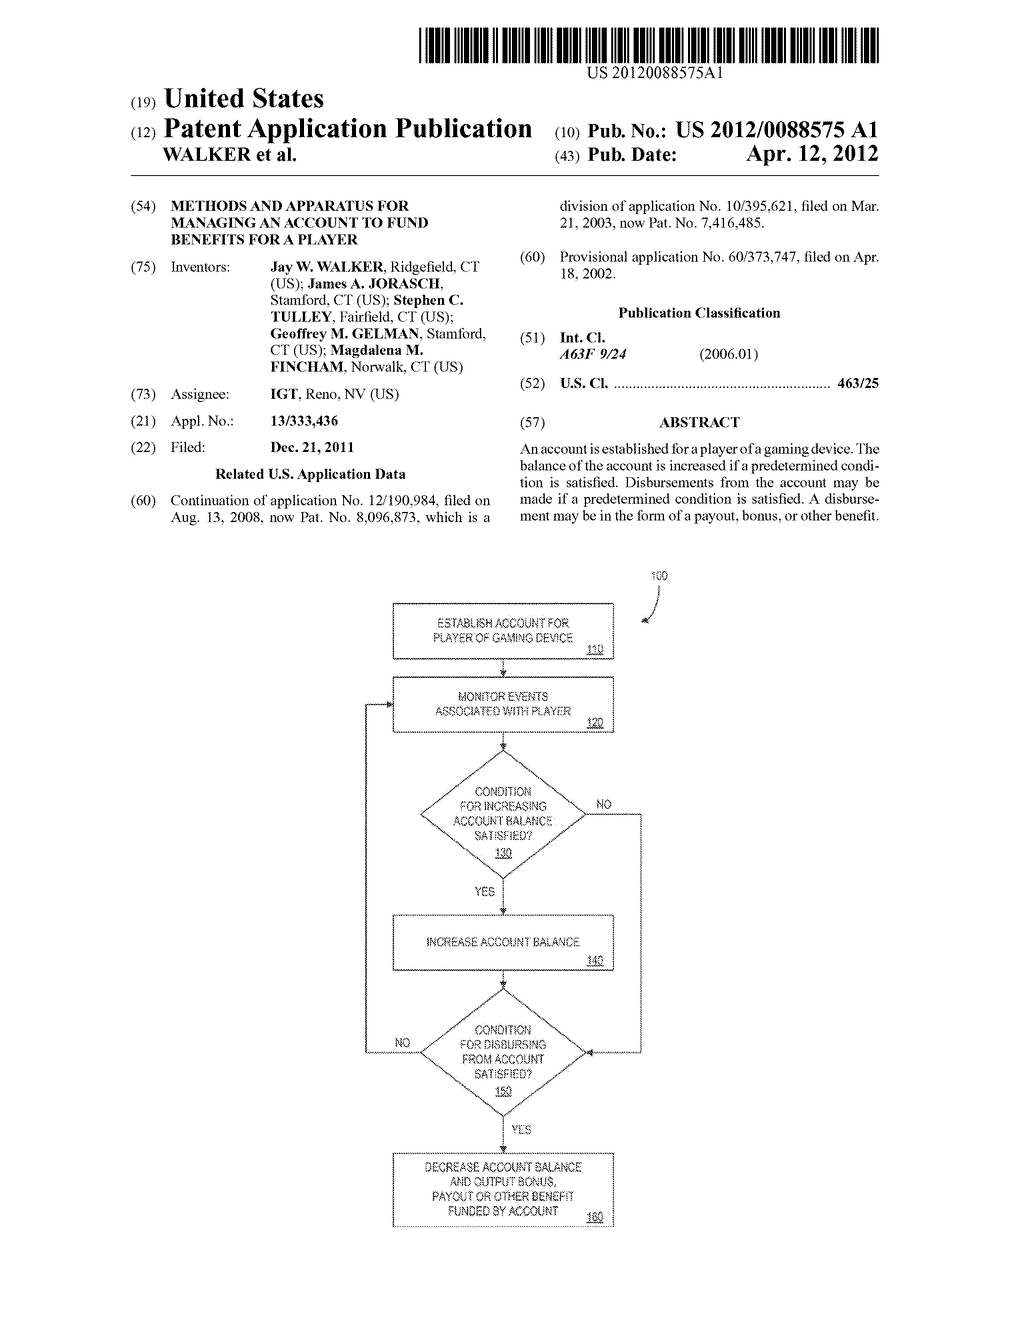 METHODS AND APPARATUS FOR MANAGING AN ACCOUNT TO FUND BENEFITS FOR A     PLAYER - diagram, schematic, and image 01